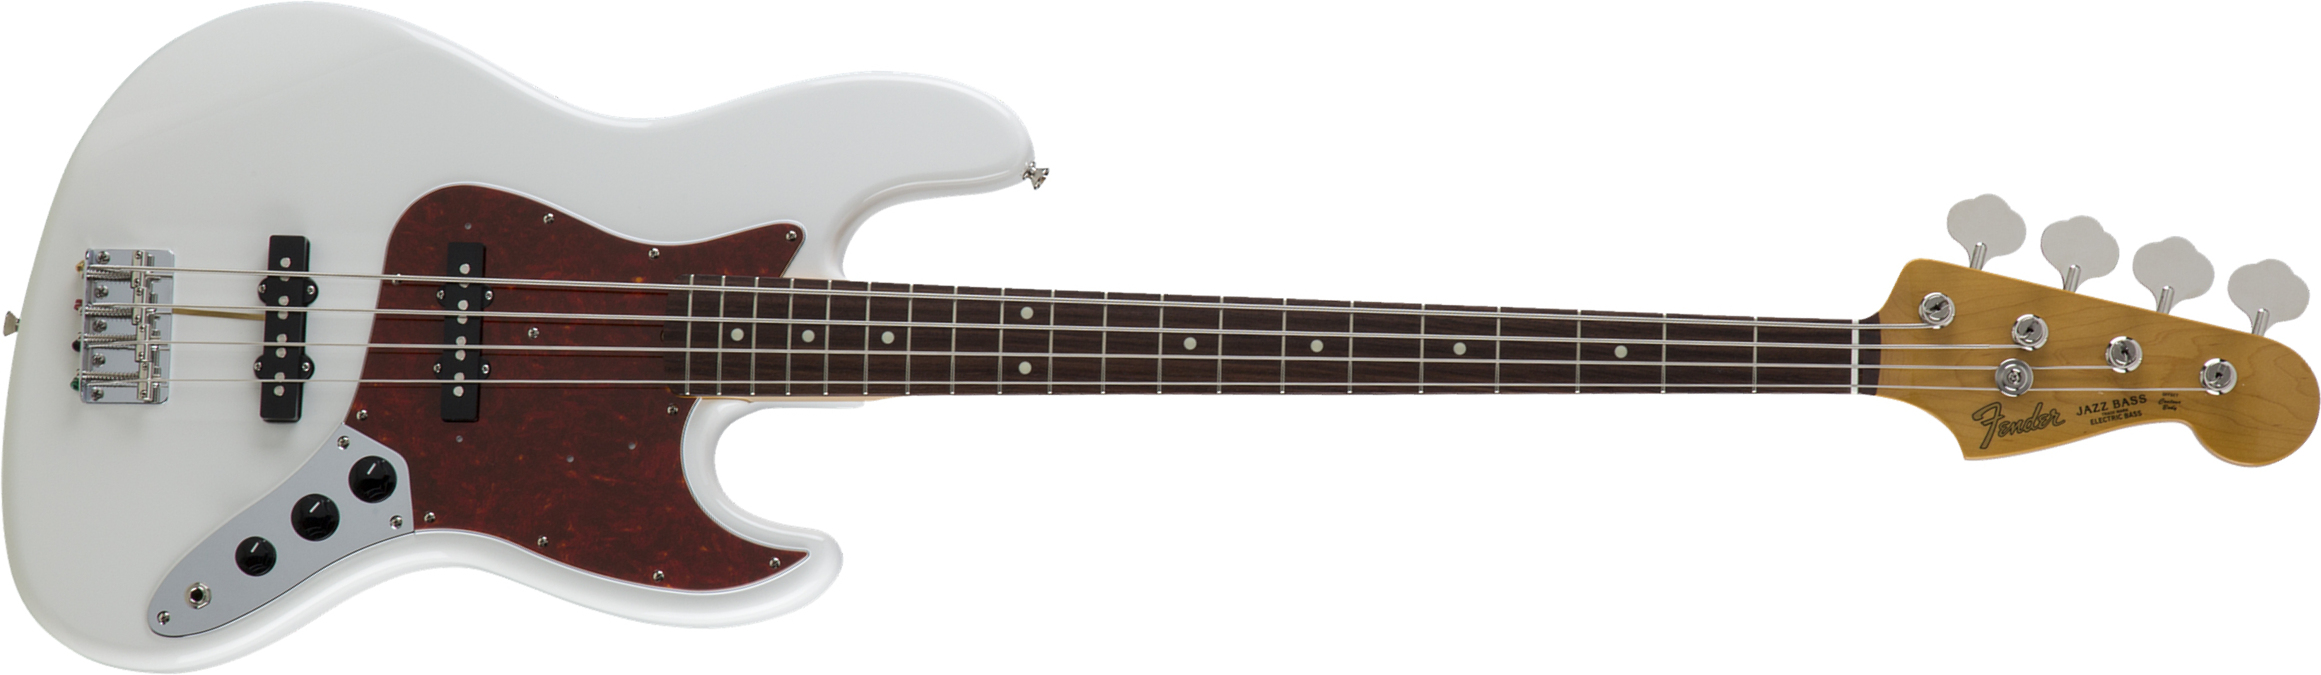 Fender Jazz Bass Traditional Ii 60s Jap 2s Trem Rw - Olympic White - Solidbody E-bass - Main picture